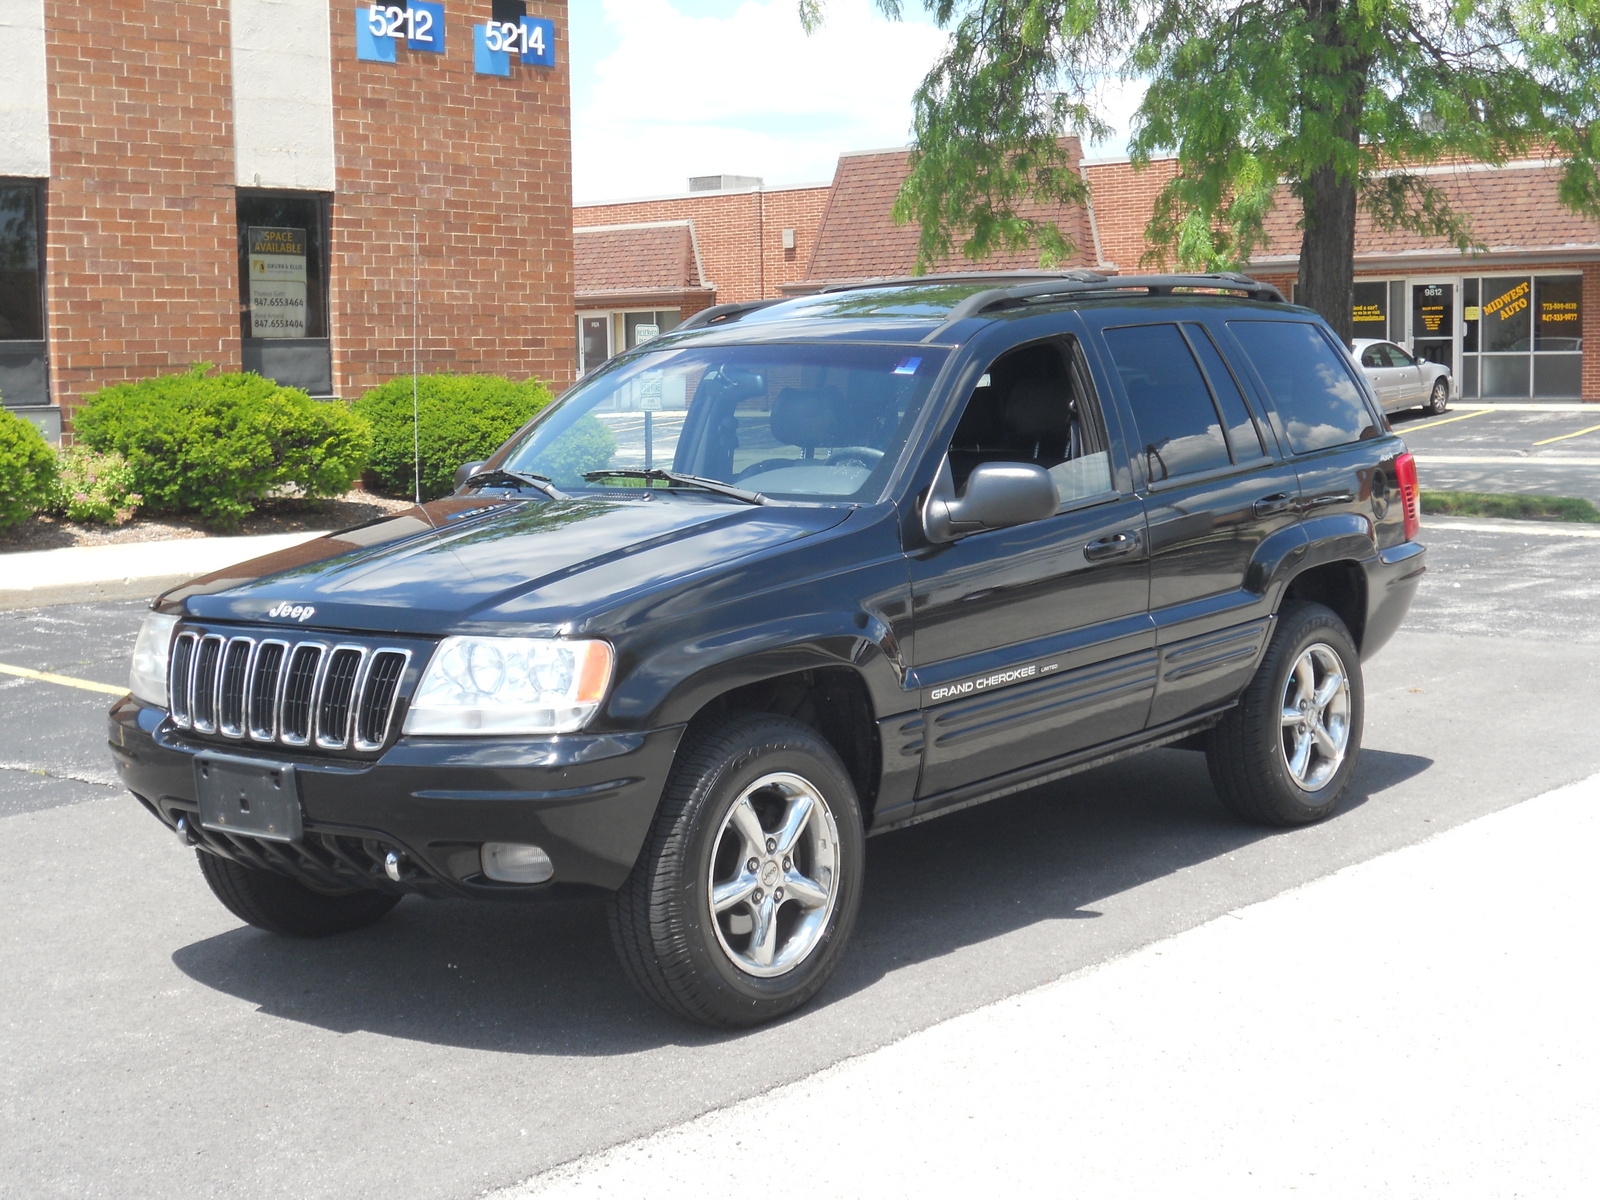 2005 Jeep grand cherokee limited sport utility 4d reviews #5